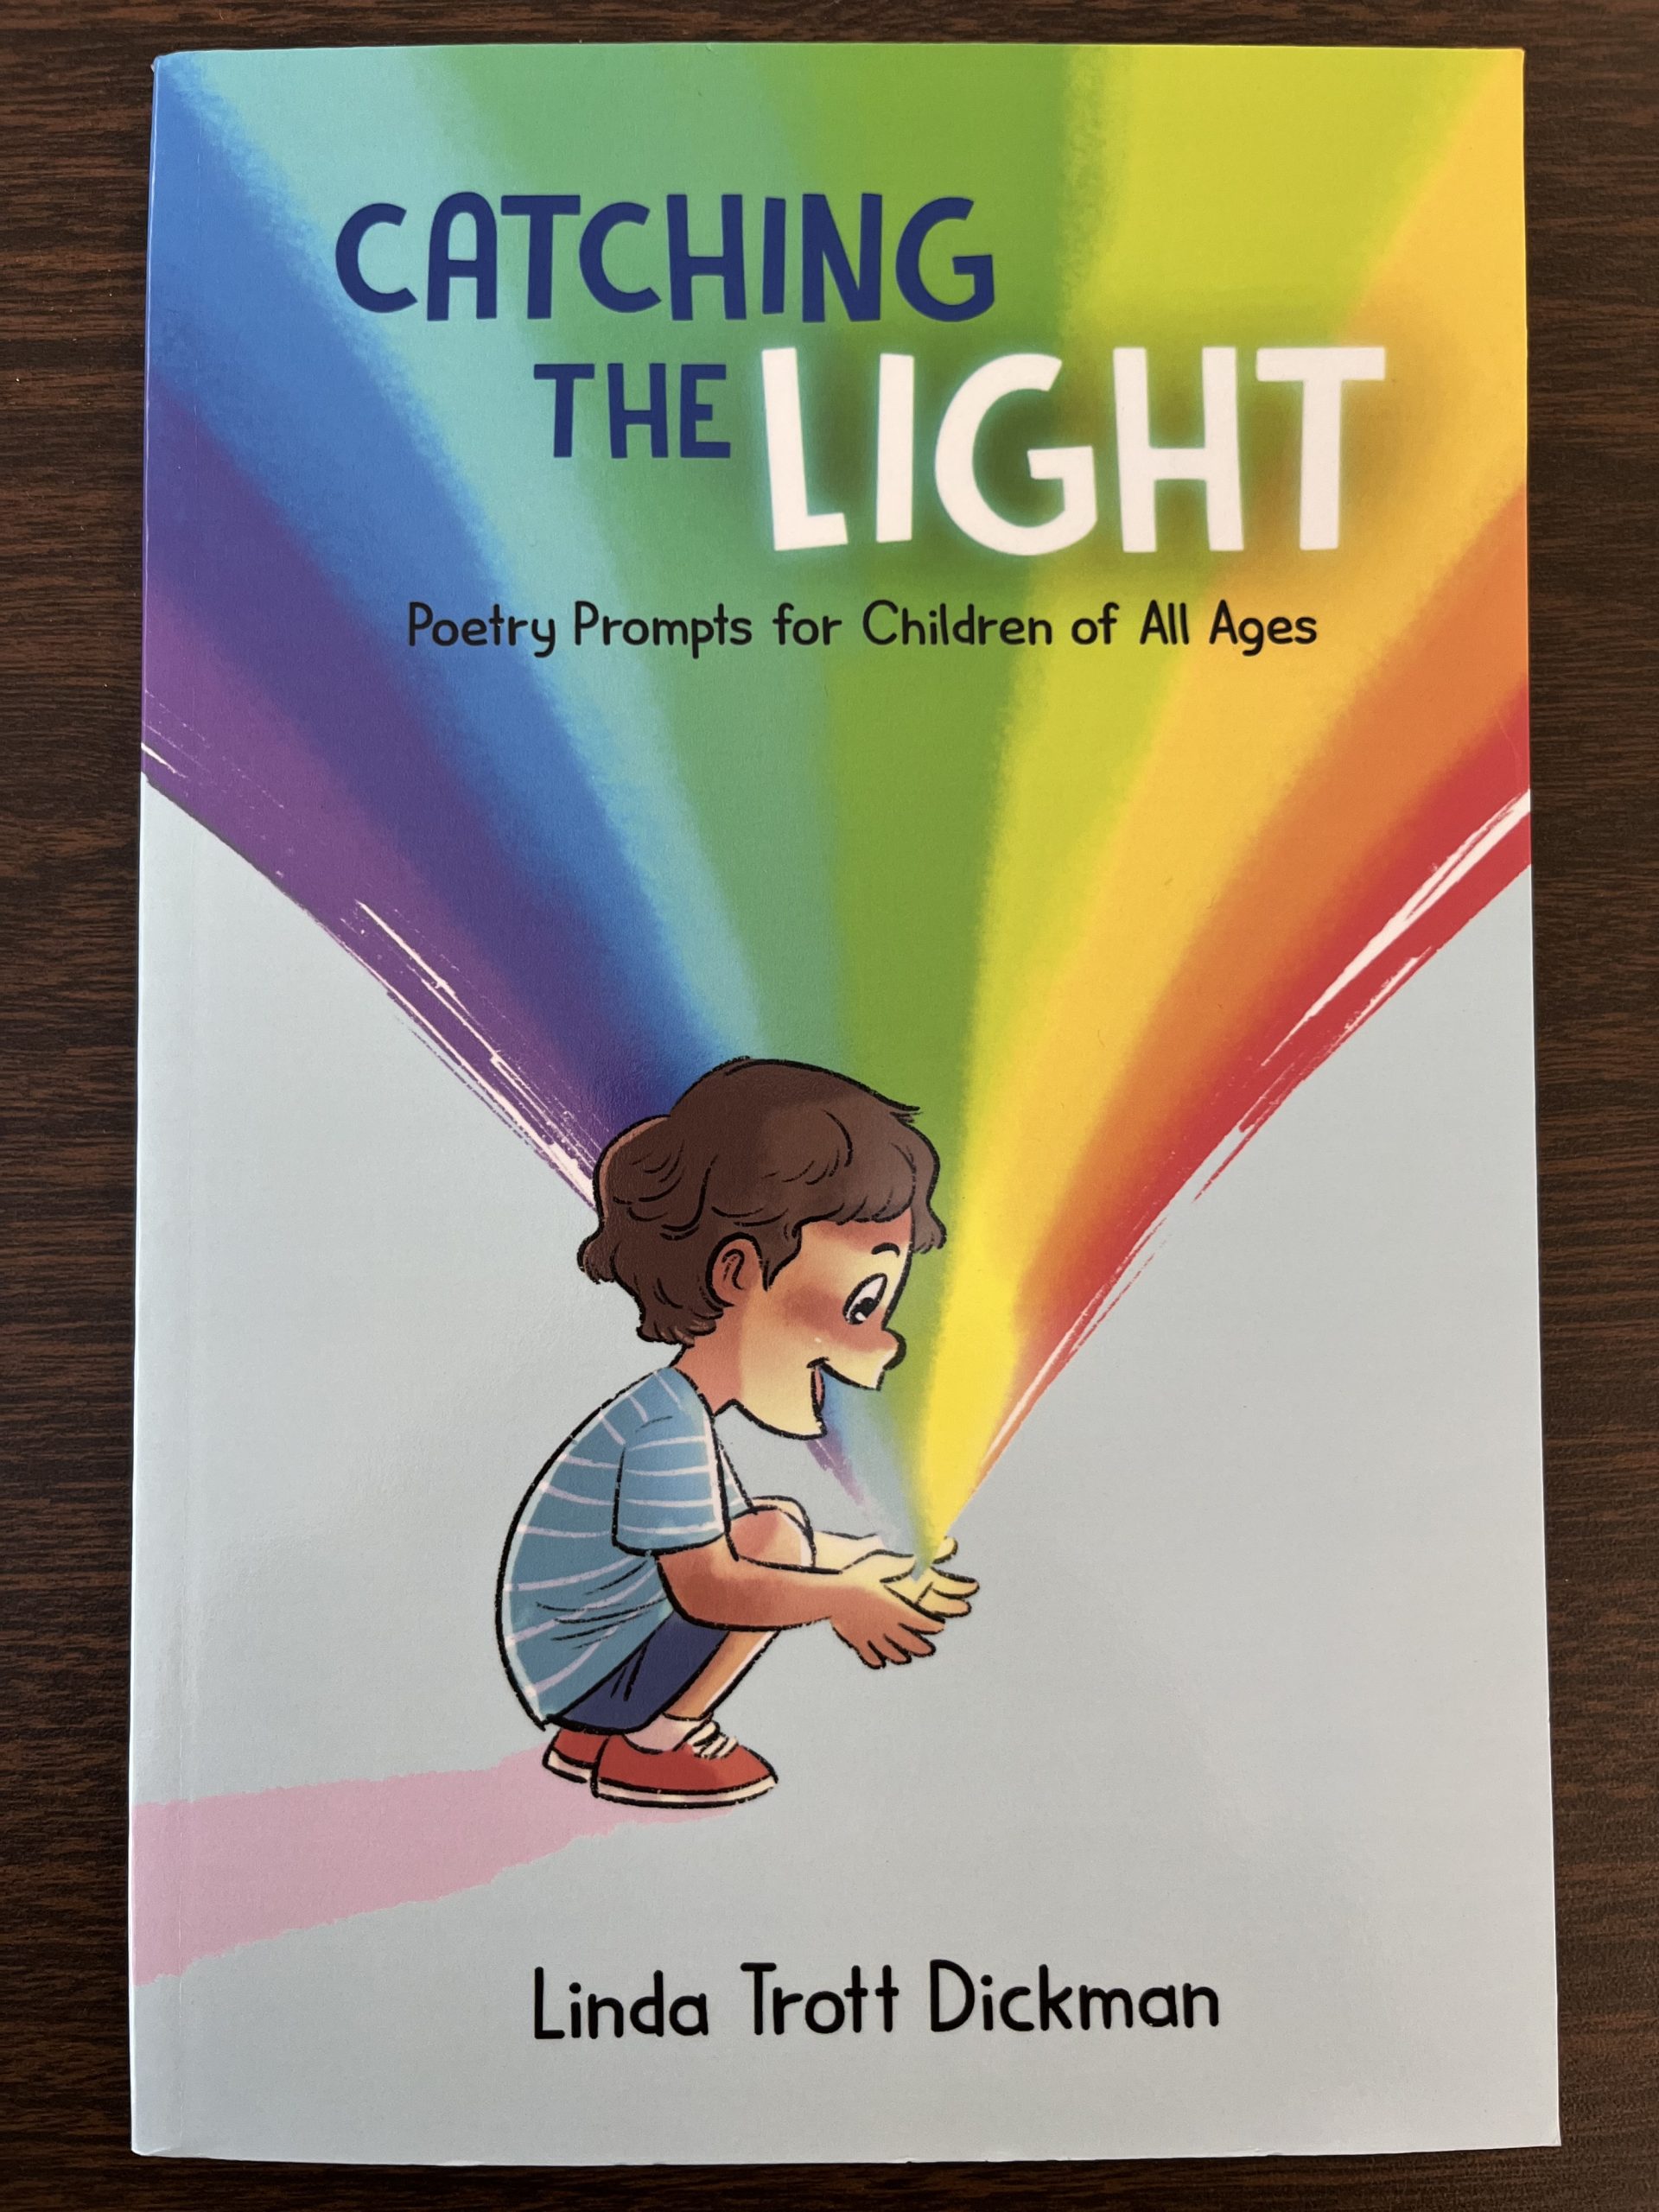 Catching the Light: Poetry Prompts for Children of All Ages